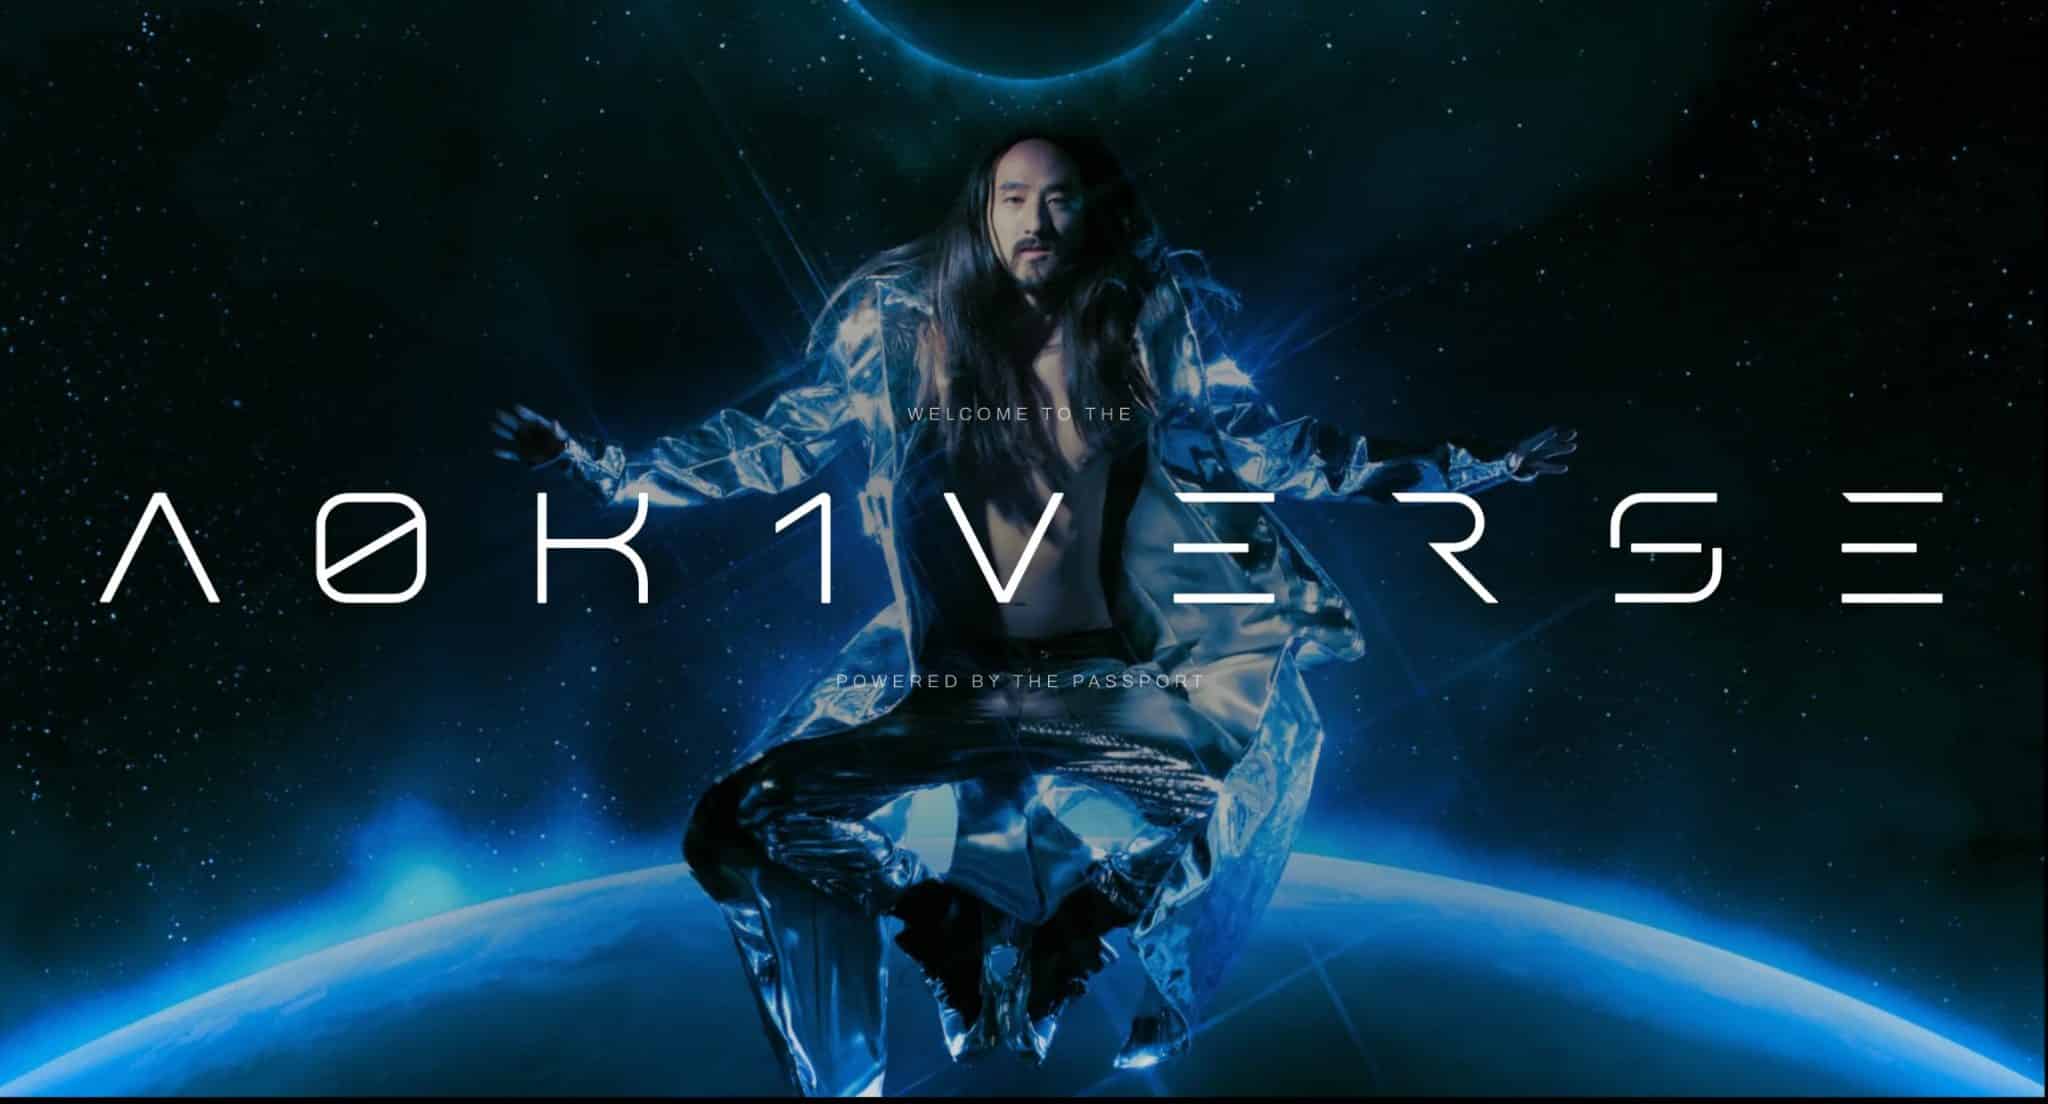 Steve Aoki floating in space with a silver jacket and "Welcome To the aokiverse" printed in text over him